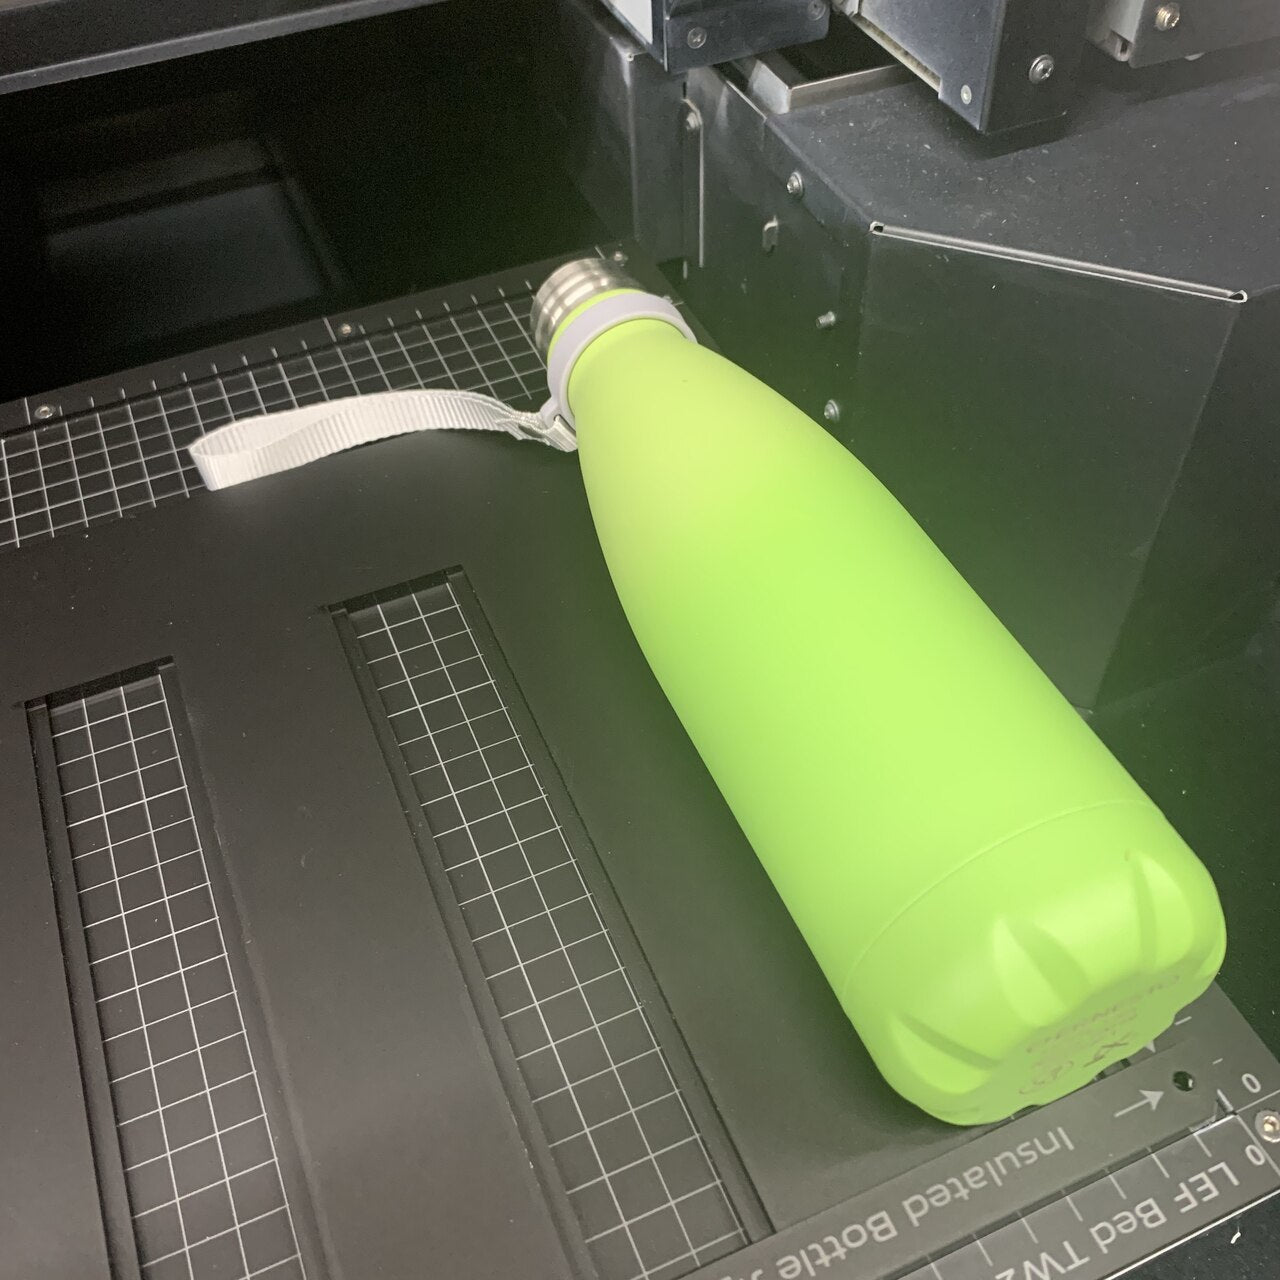 Insulated Bottle Jig for 500ml Bottles Roland MO-240 Flatbed Printer (TBA Spaces)